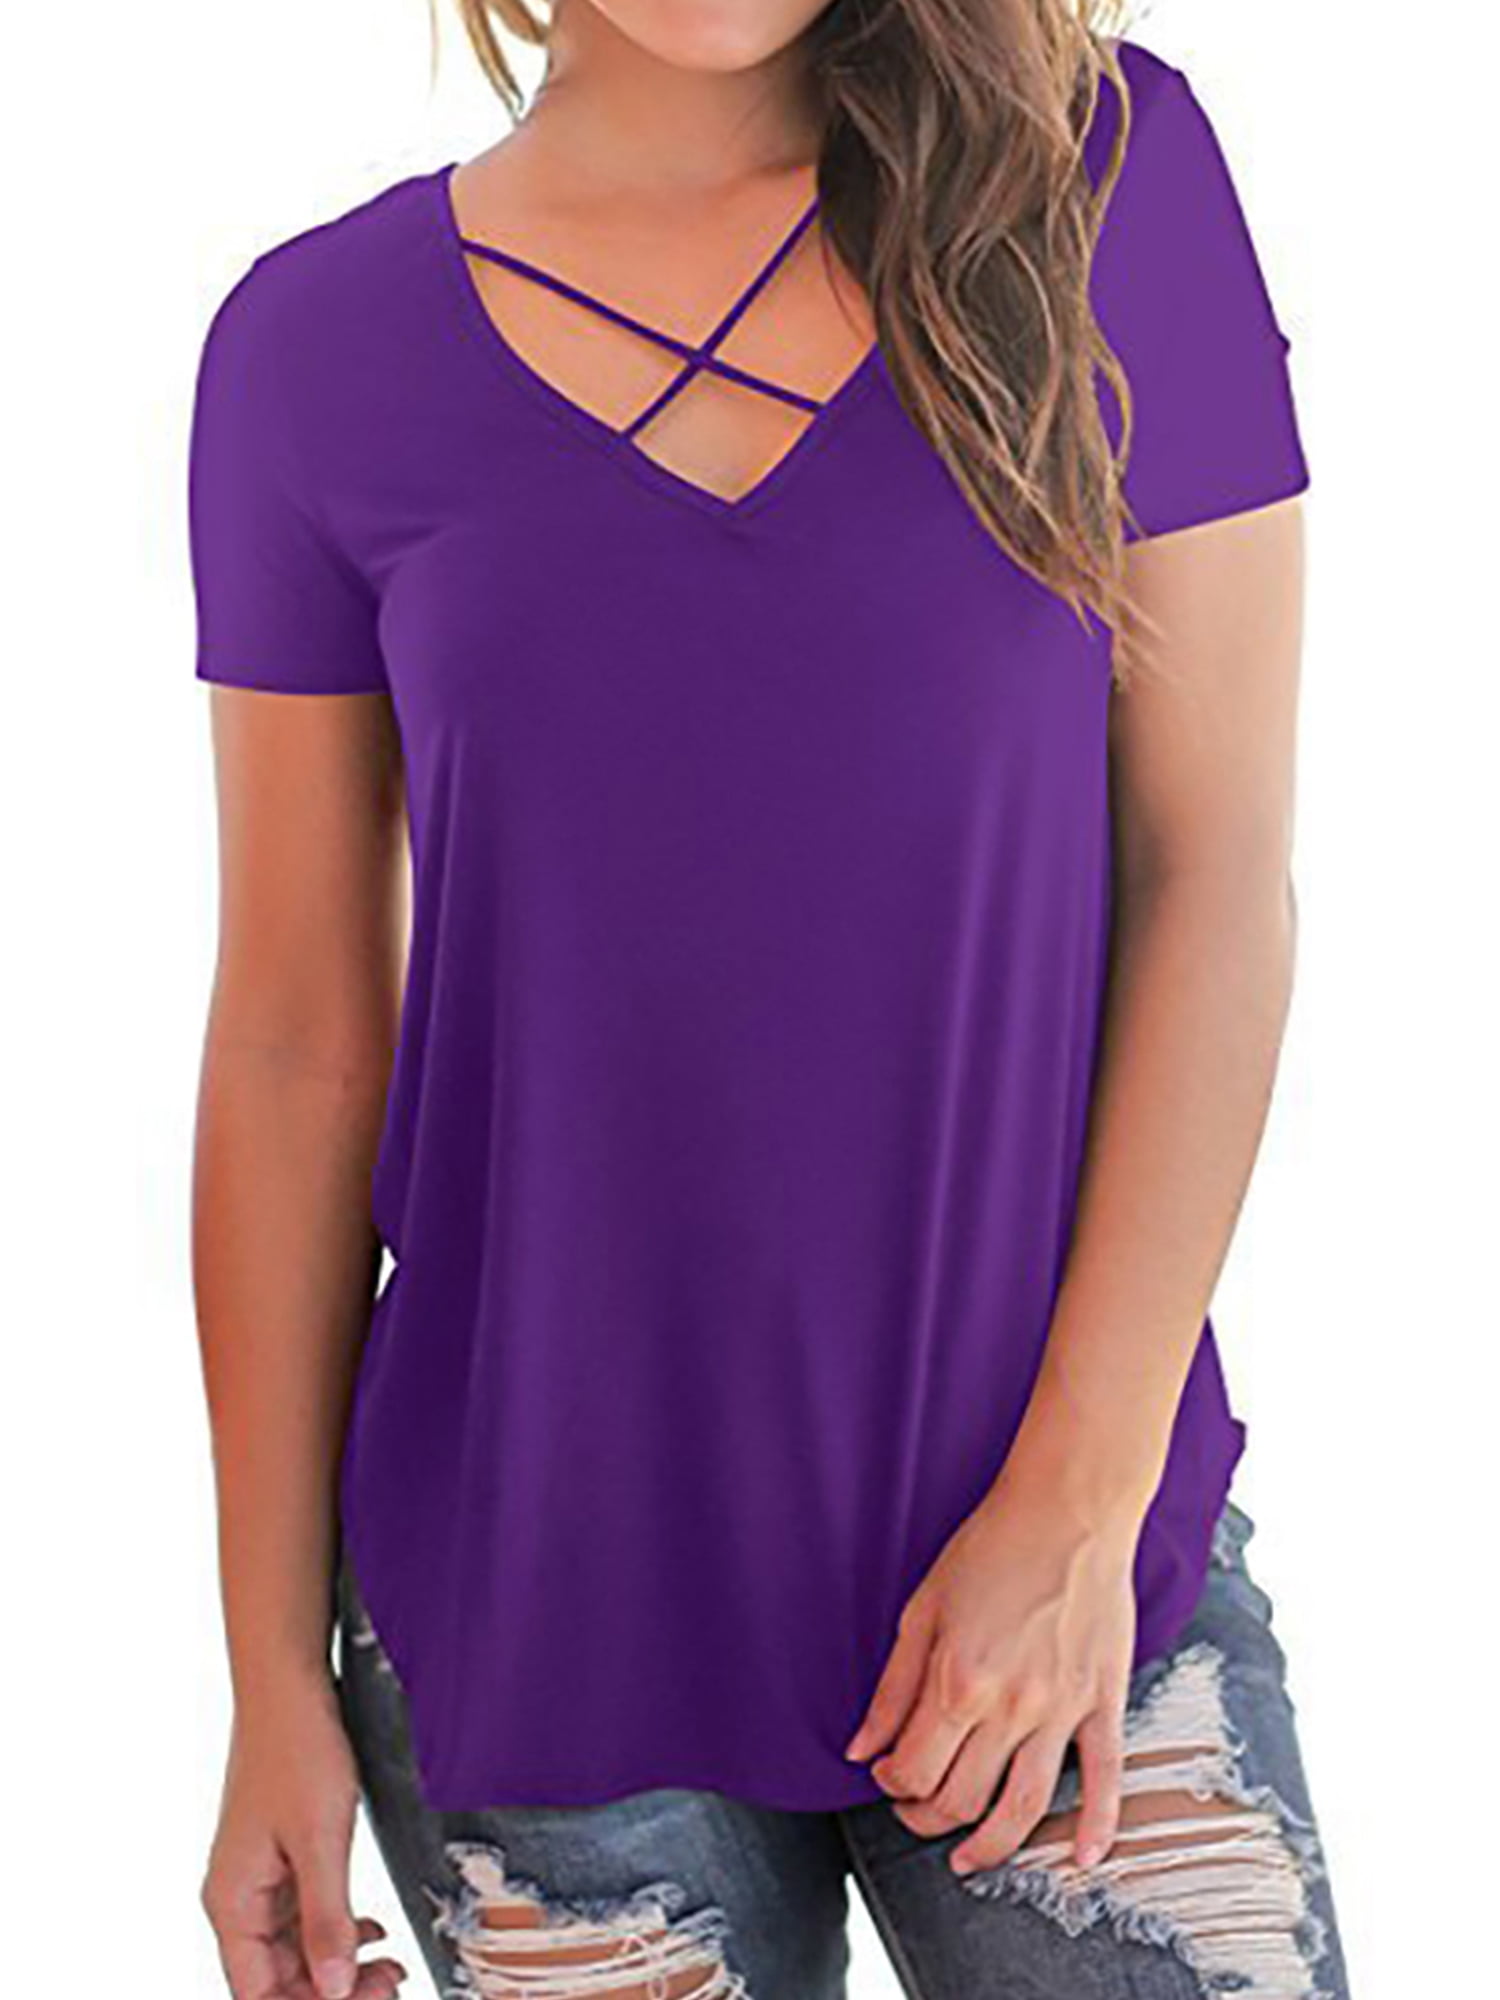 HIMONE - Sexy Cross V Neck Tops for Women Casual Summer Tunic Blouses ...